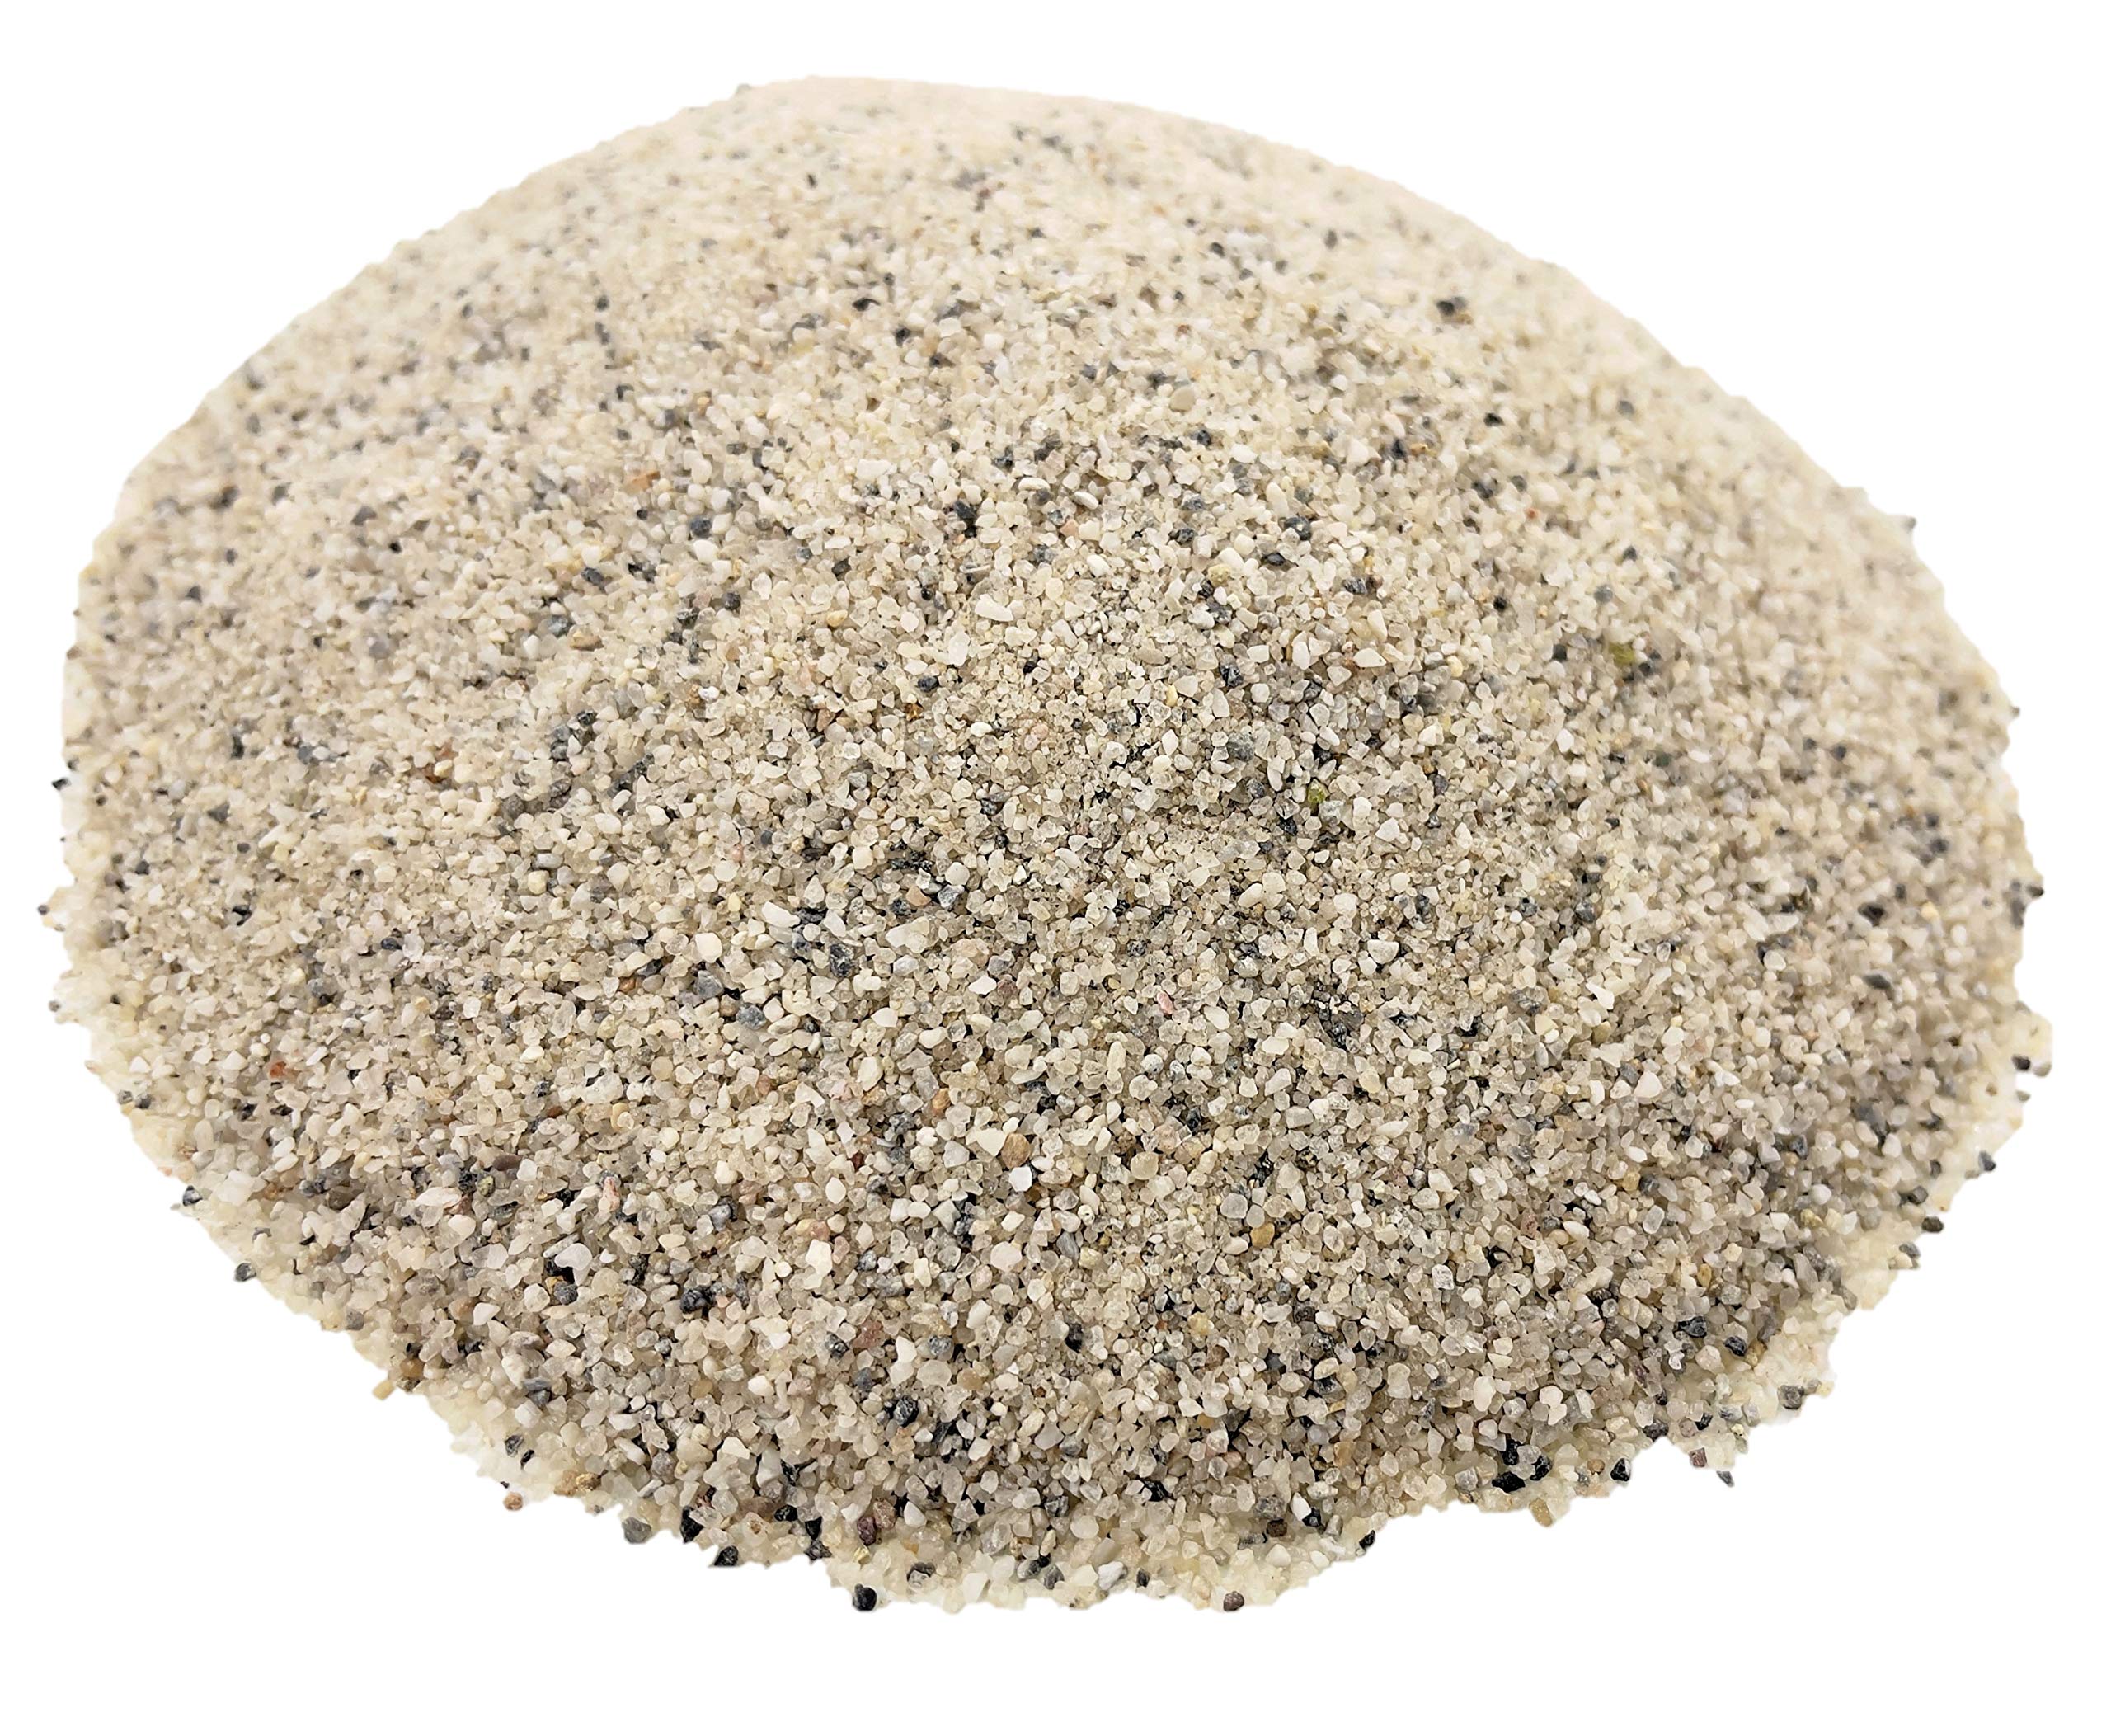 KAYSo INC Silica Sand for Fire Pits,Fire Places,Gas Fire,Base Layer Decoration-10lb Heat and Fire Proof,White Amber,Small